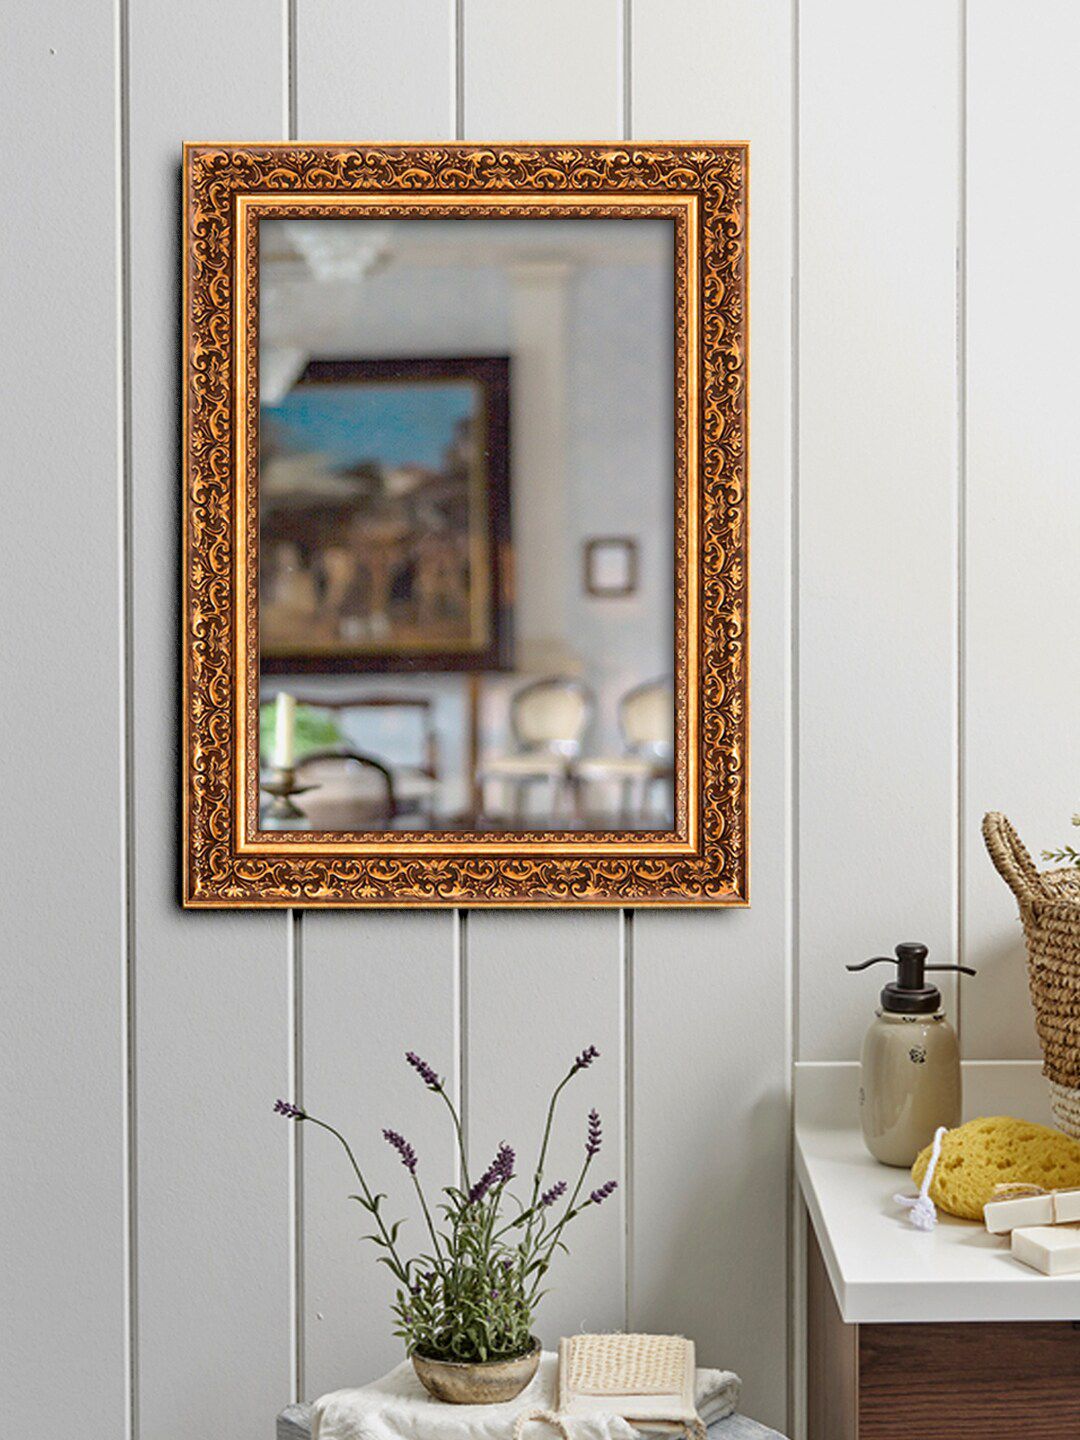 999Store Brown Textured Framed Wall Mirror Price in India